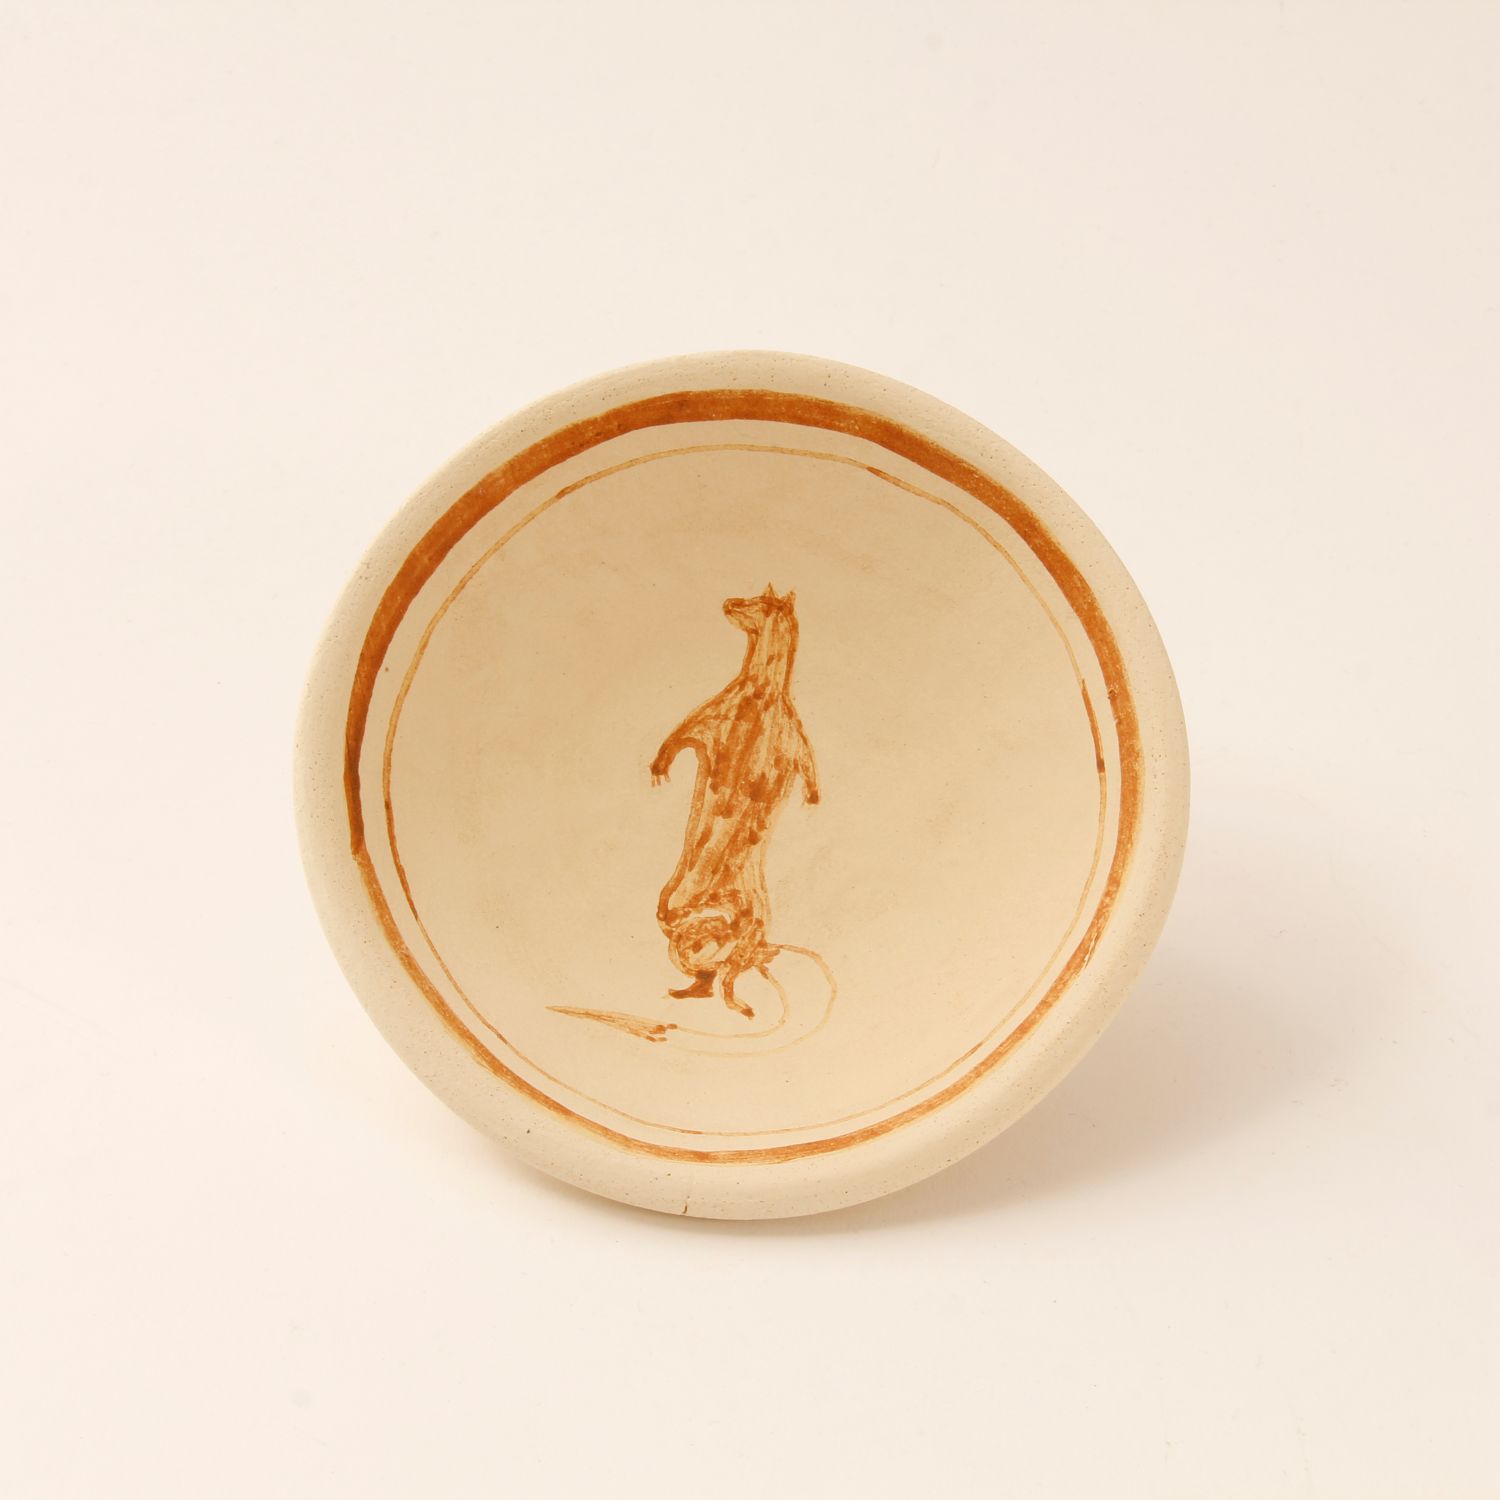 David Migwans: Assorted Weasel Bowl (Each sold separately) Product Image 2 of 2